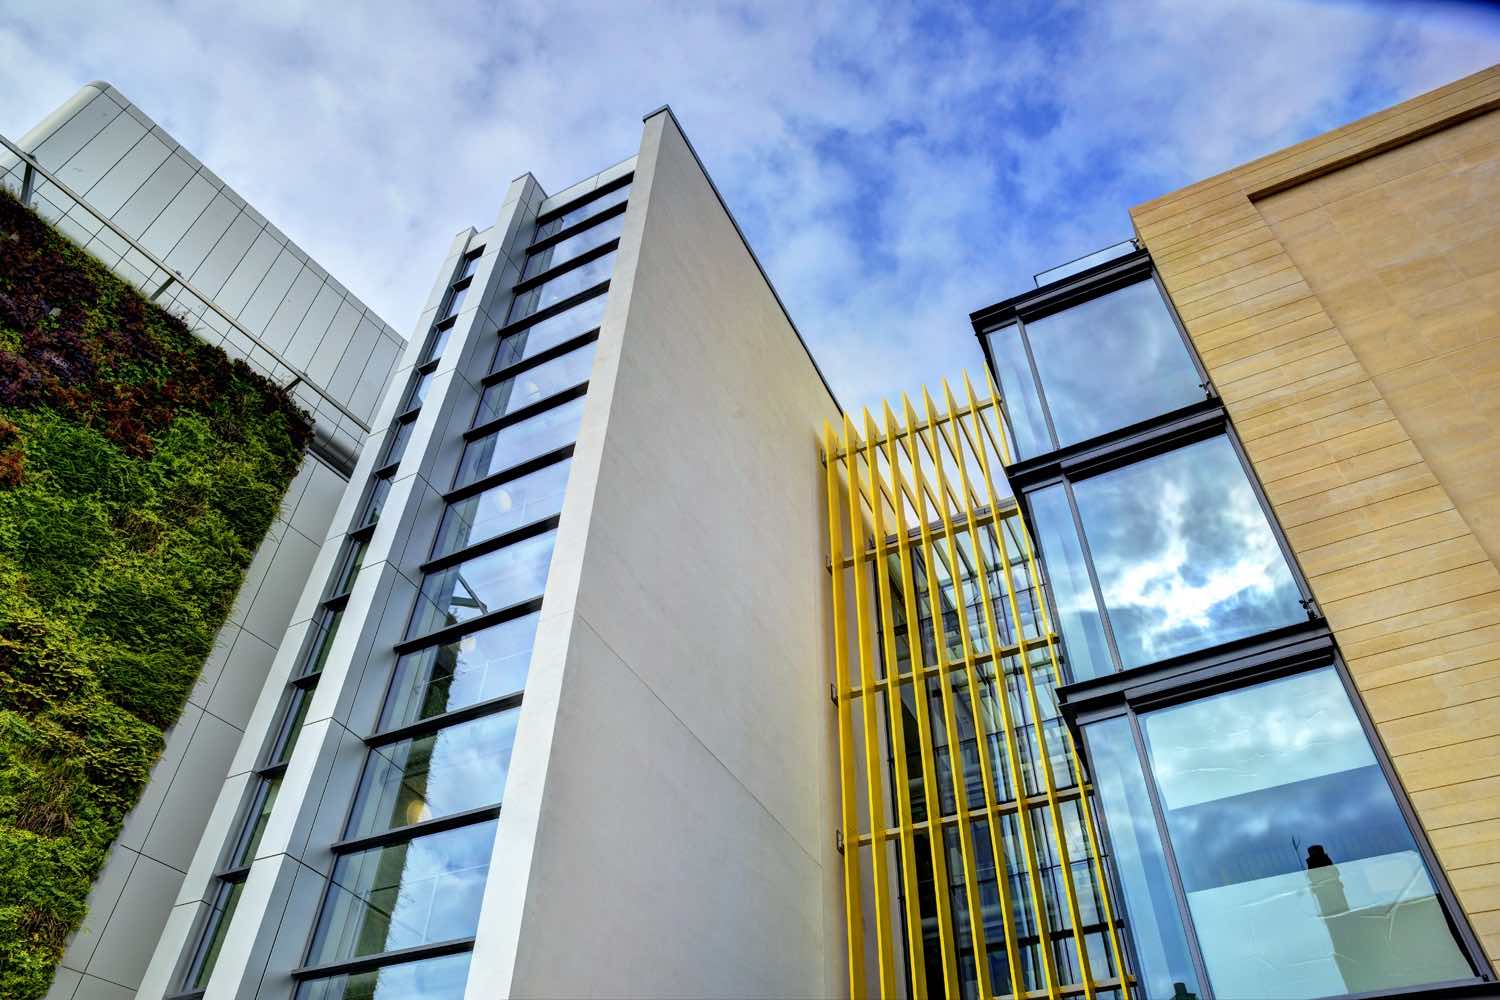 View looking up at the University of Bristol Life Sciences building in Bristol, England. Photo credit: University of Bristol